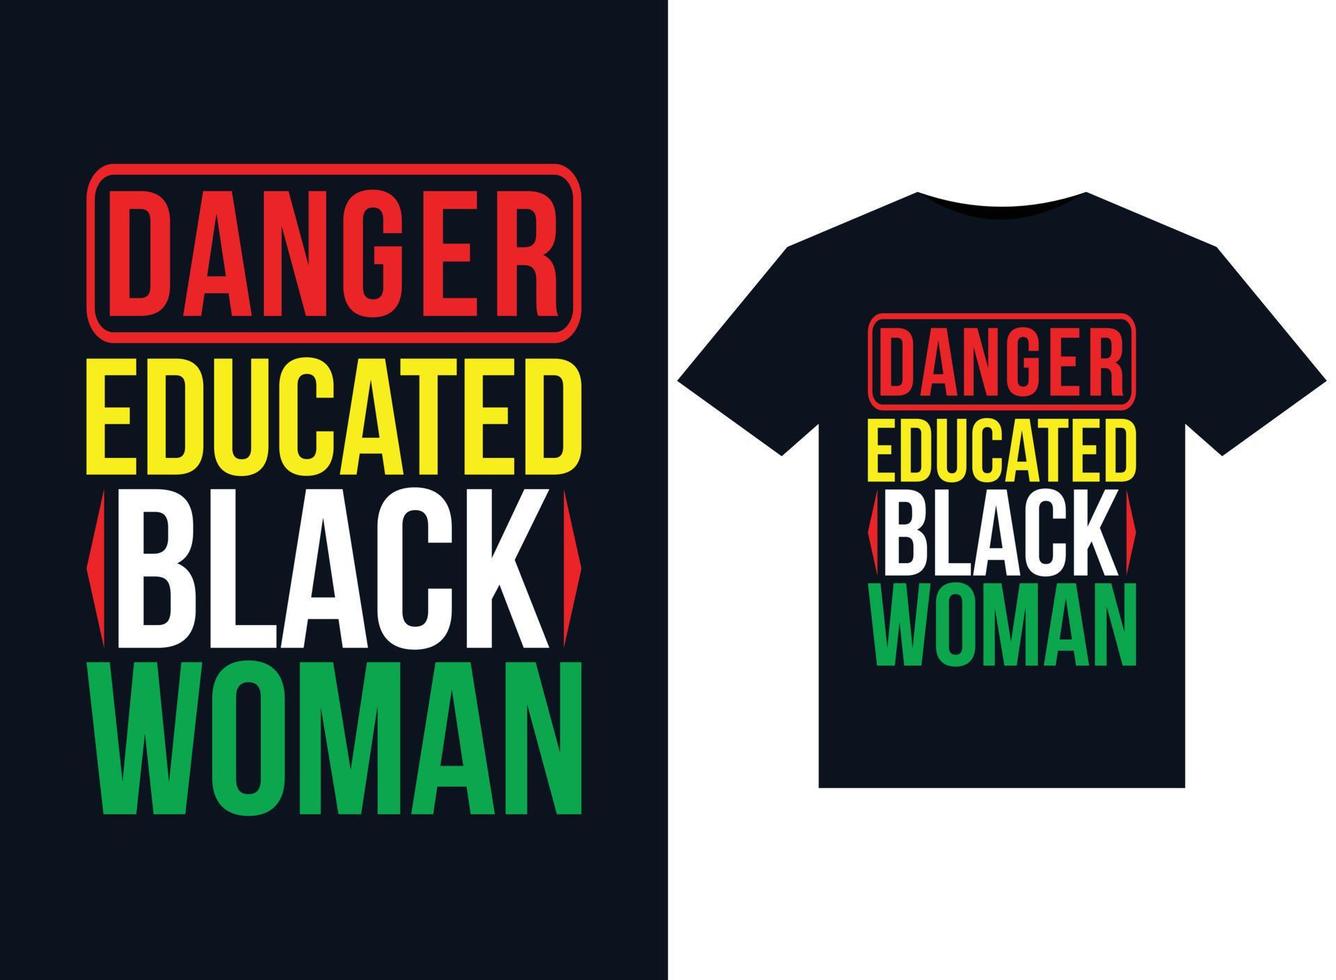 DANGER Educated BLACK WOMAN illustrations for print-ready T-Shirts design vector